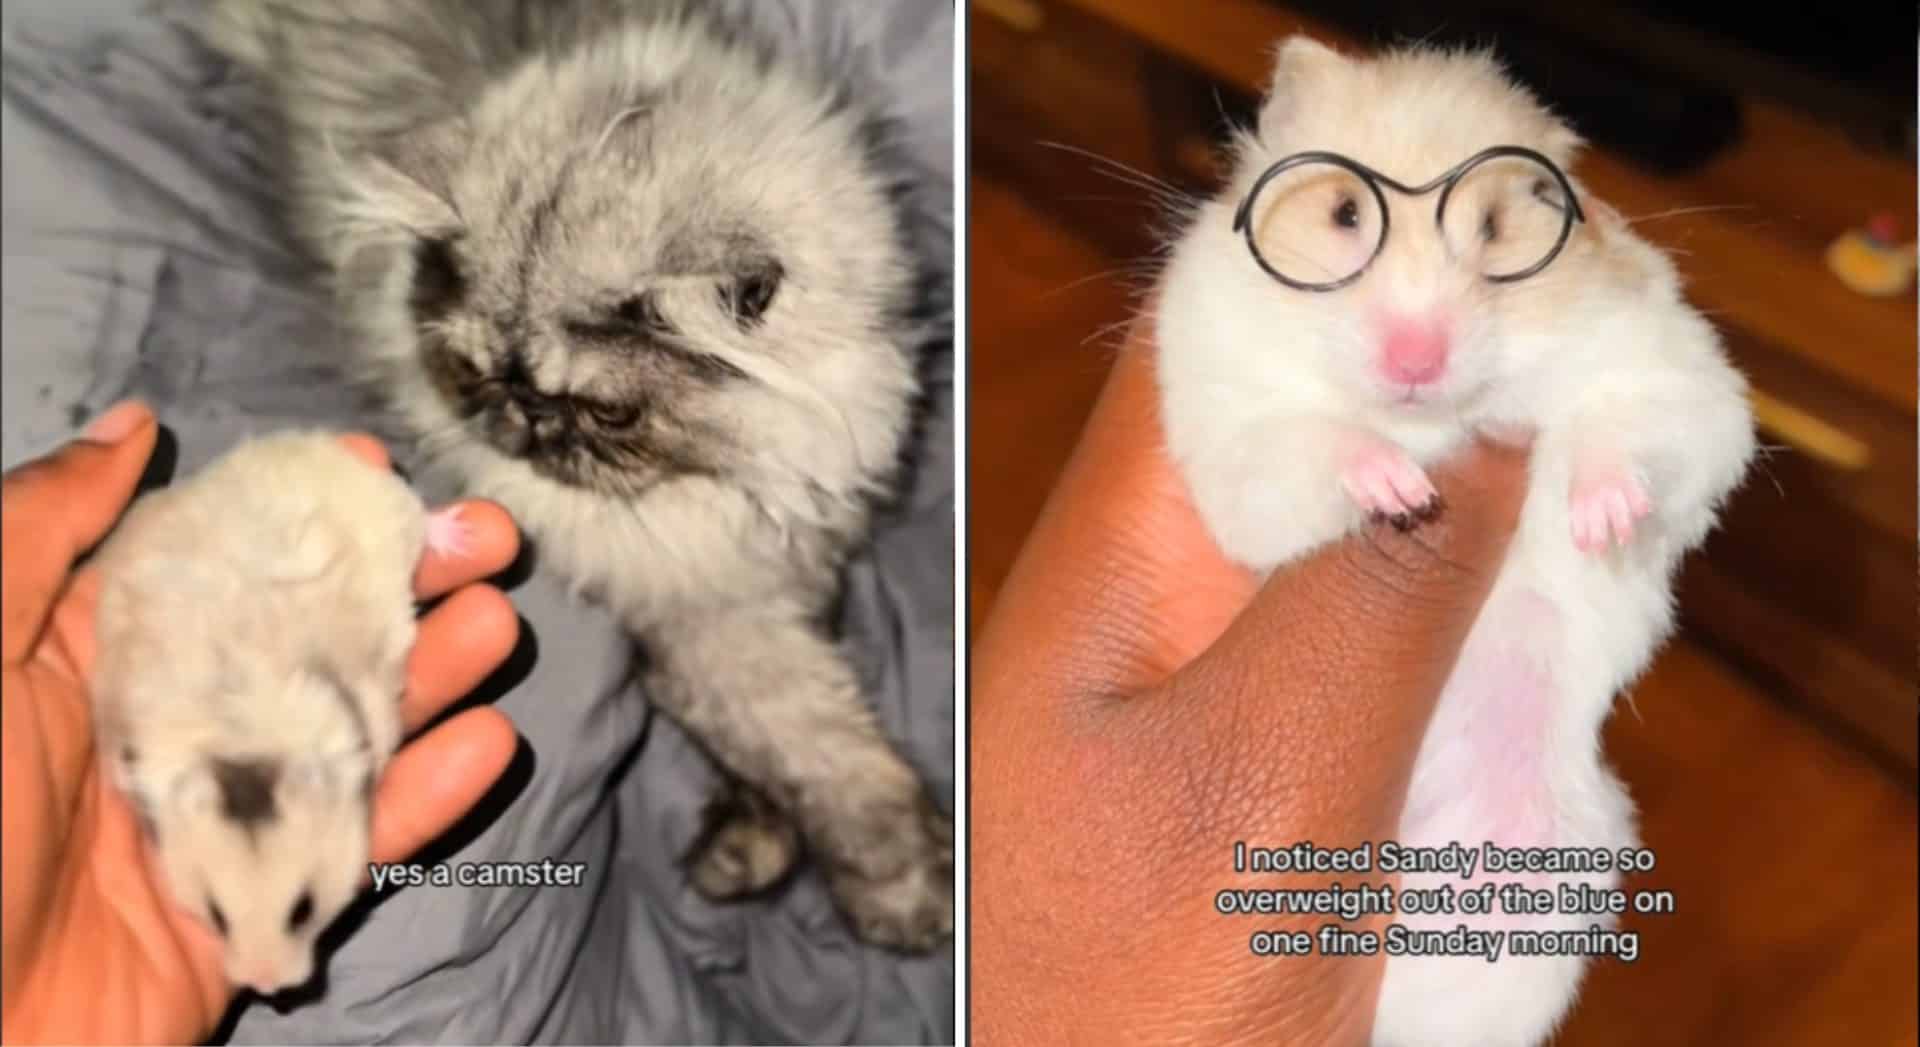 TikTok theorizes cat got a hamster pregnant in bizarre 'Camsters' trend 14